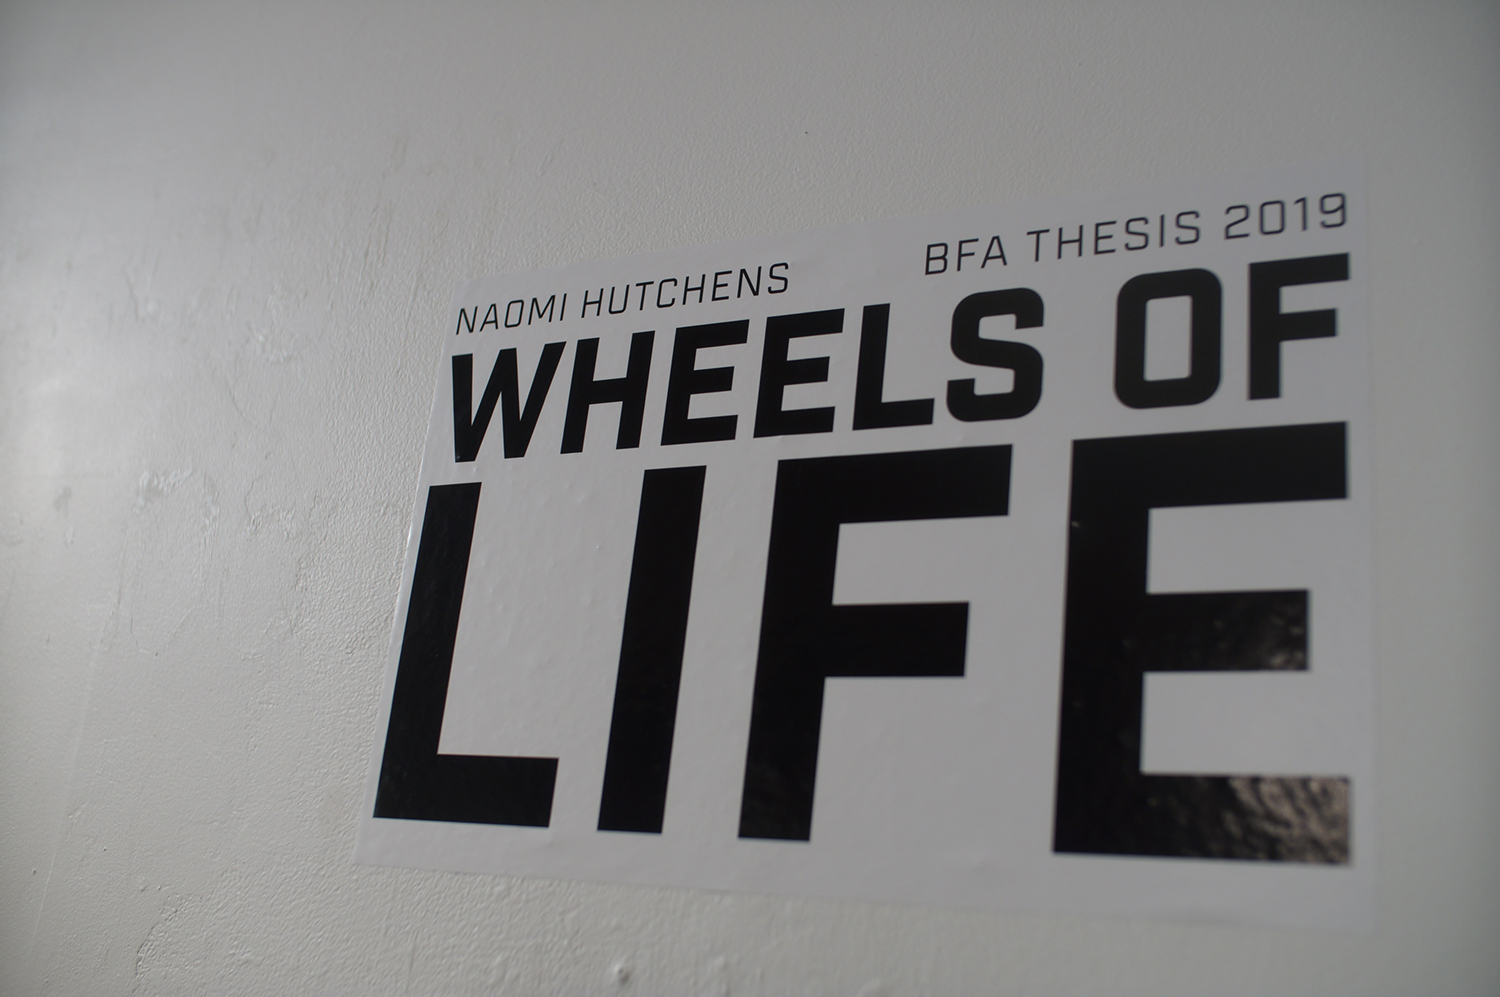 Wheels of Life show title on the wall at Naomi Hutchquist's BFA thesis exhibition at Well Sreet Art Gallery in 2019. Image courtesy of Naomi Hutchquist